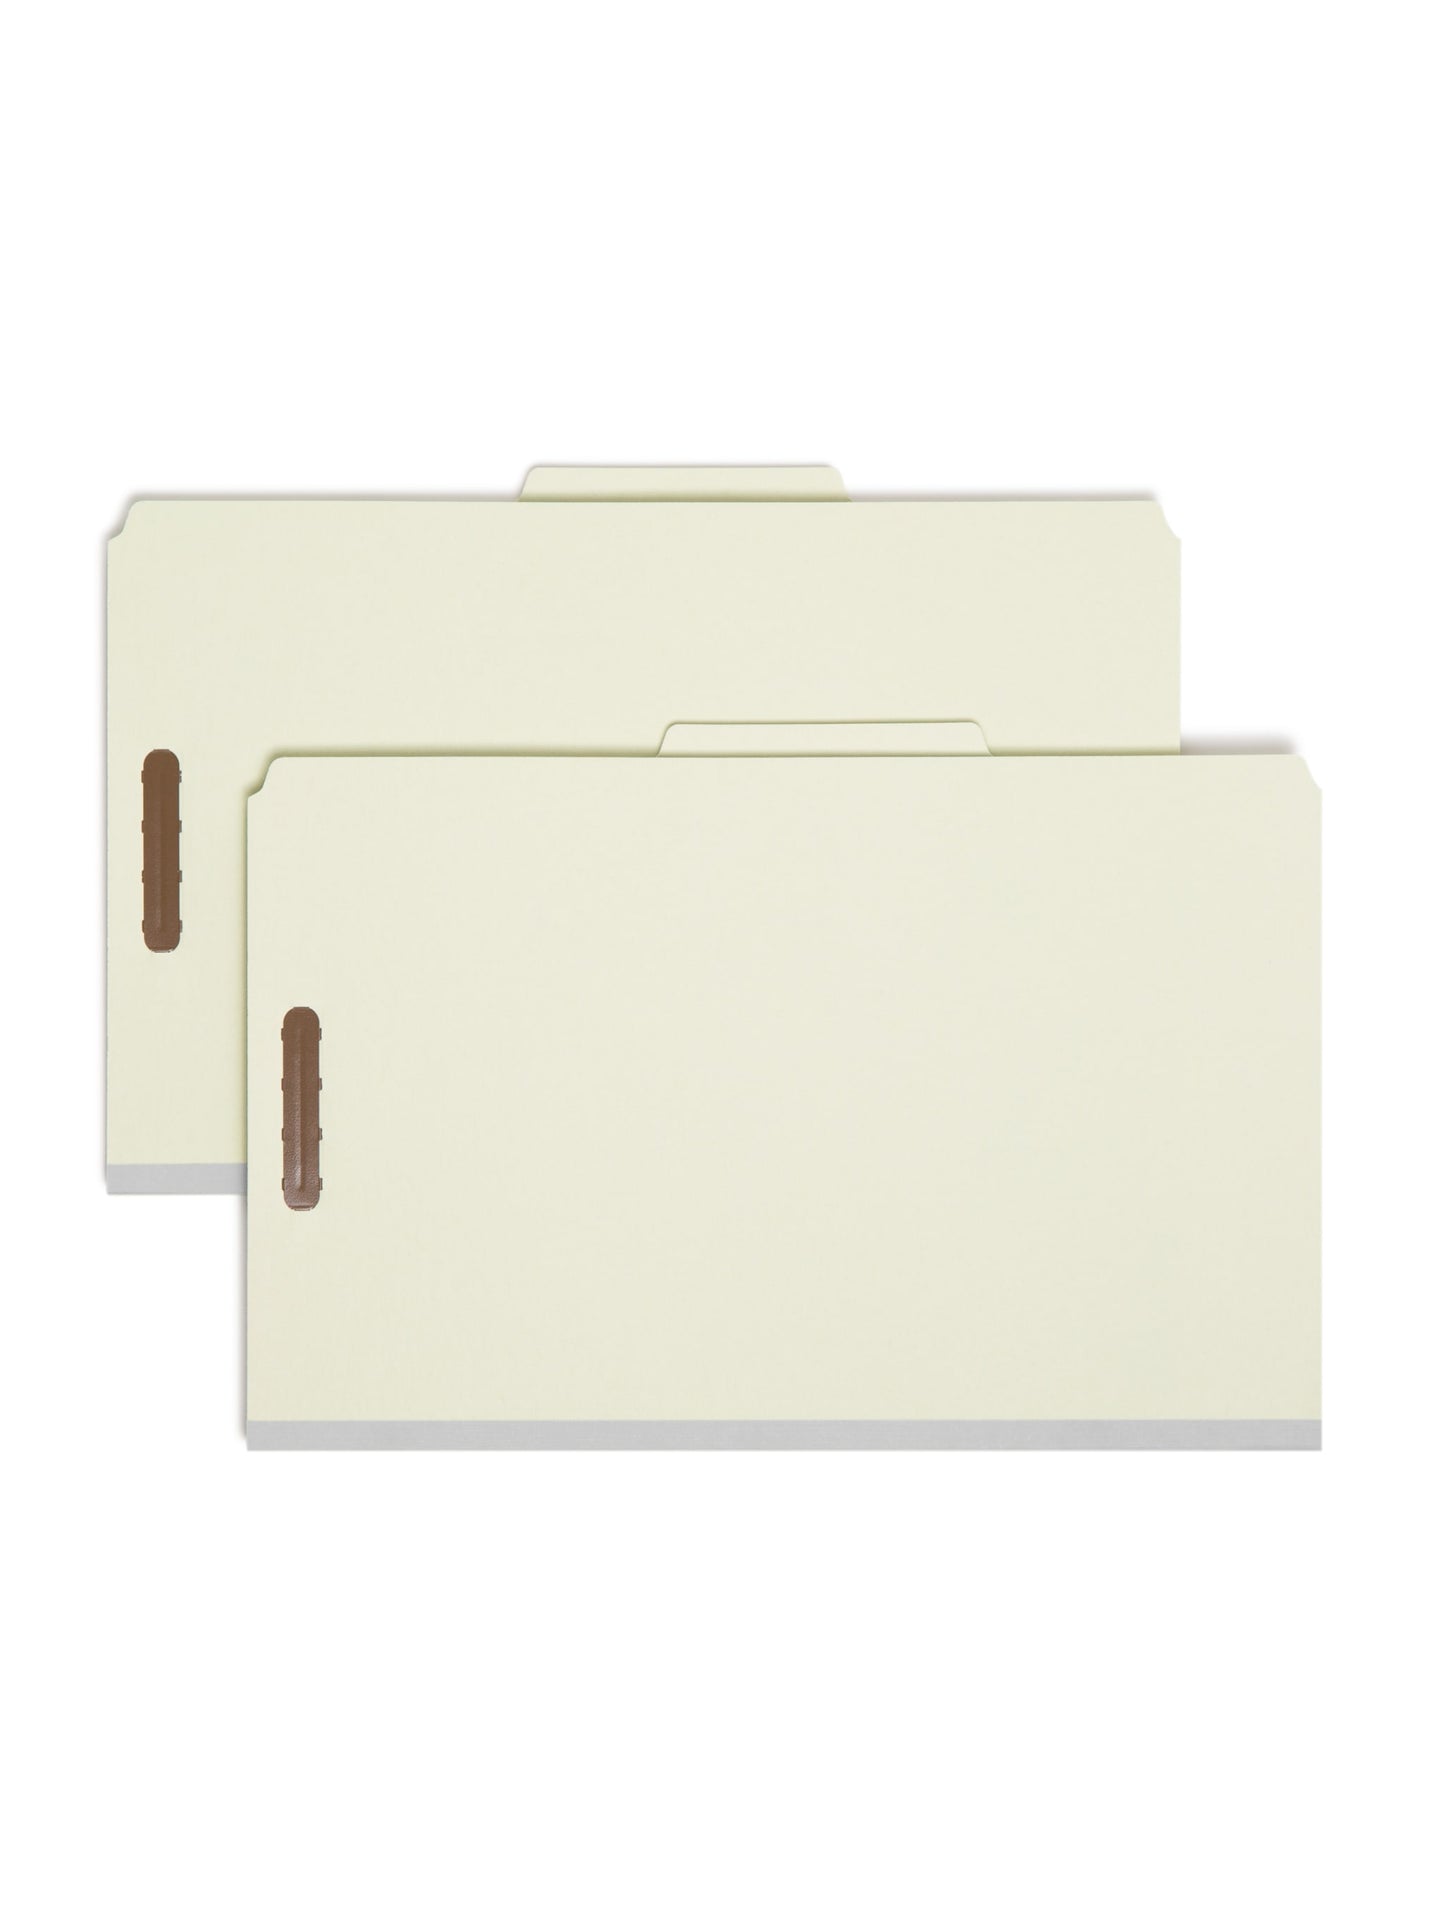 Pressboard Classification File Folders, 2 Dividers, 2 inch Expansion, Gray/Green Color, Legal Size, 